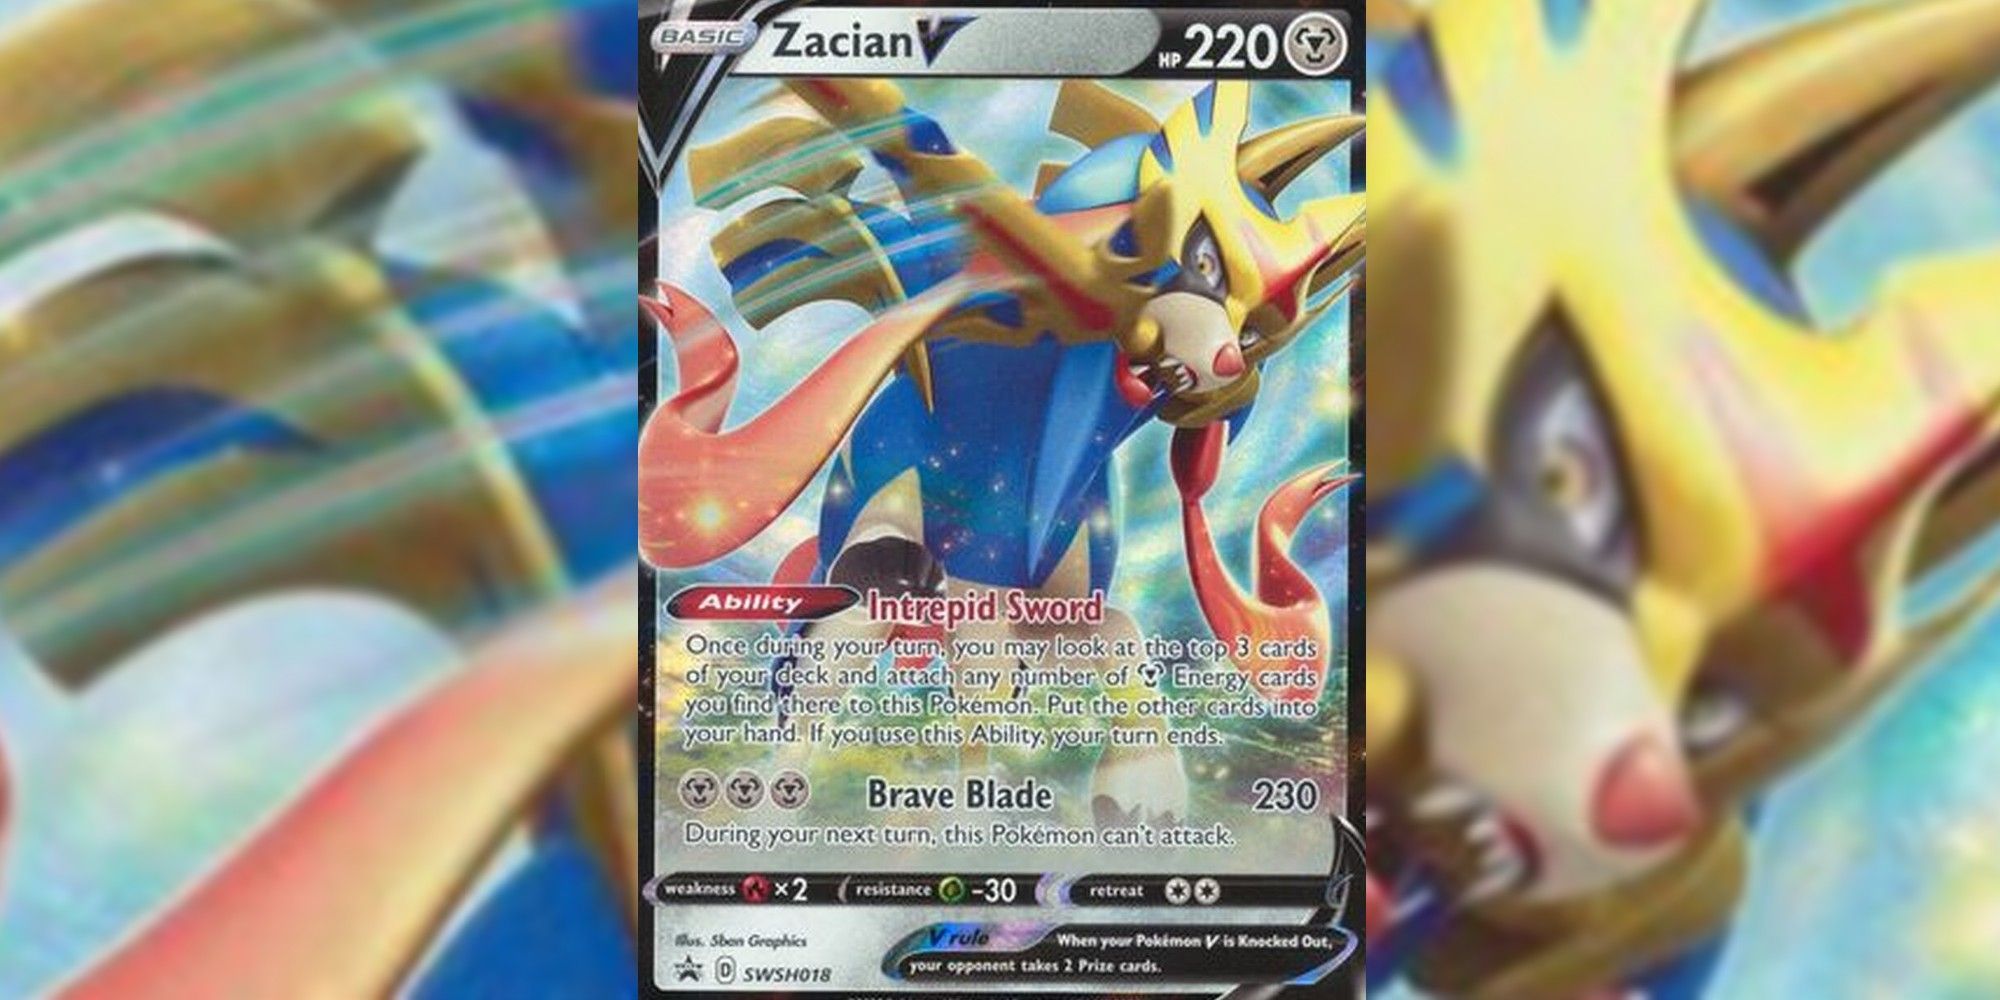 Zacian V card with blurred background